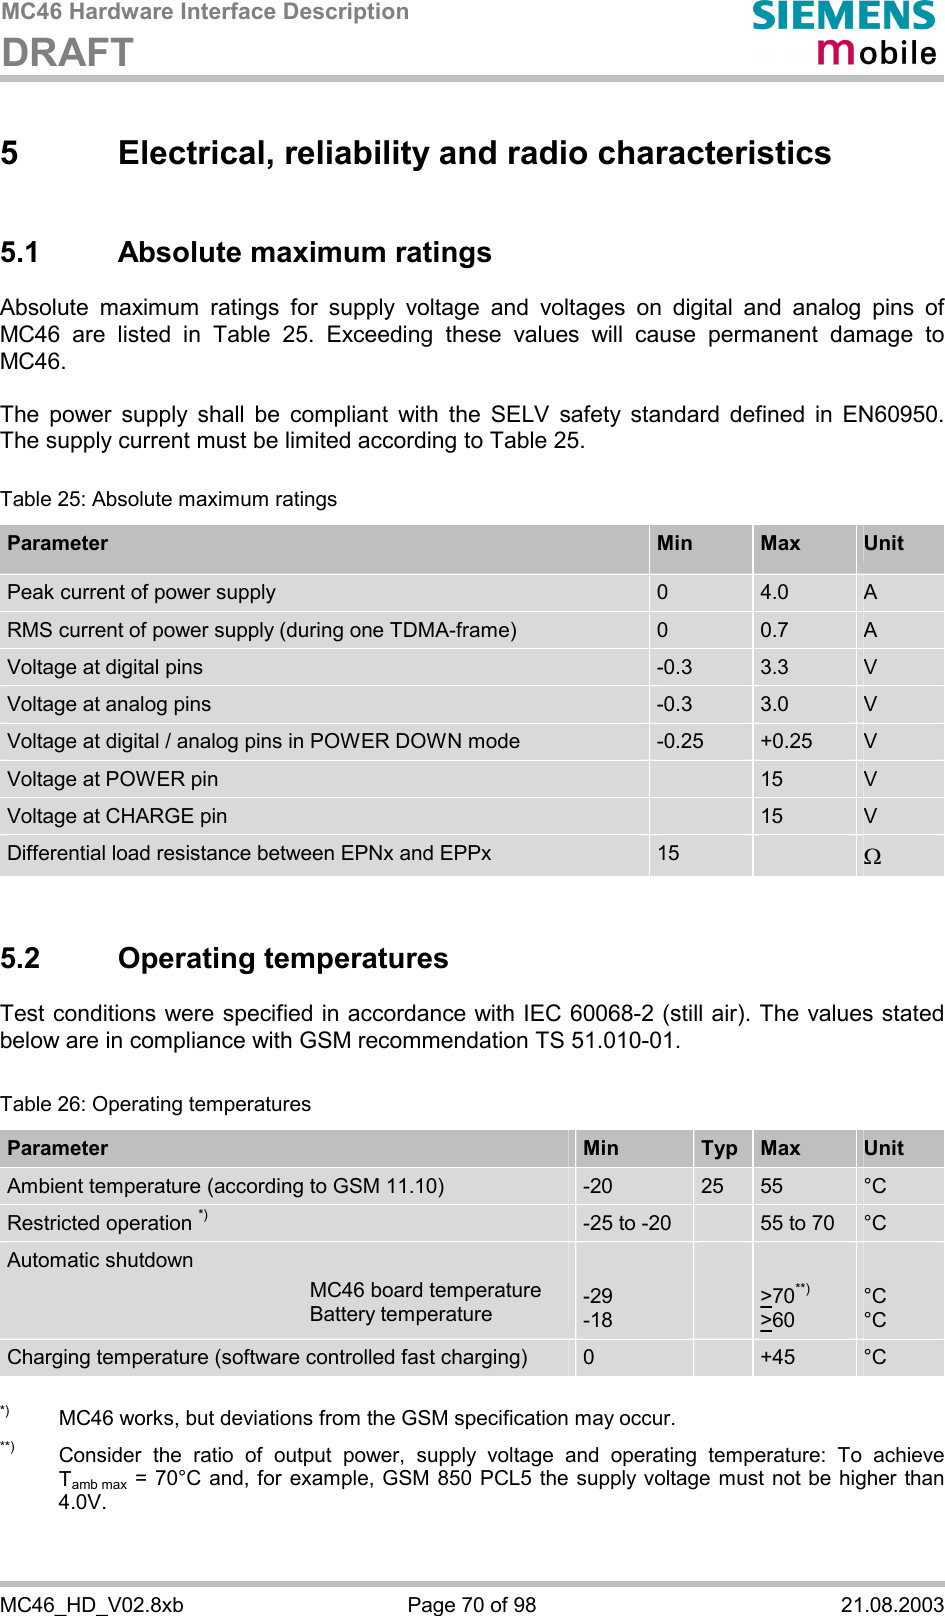 MC46 Hardware Interface Description DRAFT      MC46_HD_V02.8xb  Page 70 of 98  21.08.2003 5  Electrical, reliability and radio characteristics 5.1  Absolute maximum ratings Absolute maximum ratings for supply voltage and voltages on digital and analog pins of MC46 are listed in Table 25. Exceeding these values will cause permanent damage to MC46.  The power supply shall be compliant with the SELV safety standard defined in EN60950. The supply current must be limited according to Table 25.  Table 25: Absolute maximum ratings Parameter  Min  Max  Unit Peak current of power supply  0  4.0  A RMS current of power supply (during one TDMA-frame)  0  0.7  A Voltage at digital pins   -0.3  3.3  V Voltage at analog pins   -0.3  3.0  V Voltage at digital / analog pins in POWER DOWN mode  -0.25  +0.25  V Voltage at POWER pin   15  V Voltage at CHARGE pin   15  V Differential load resistance between EPNx and EPPx  15   W  5.2 Operating temperatures Test conditions were specified in accordance with IEC 60068-2 (still air). The values stated below are in compliance with GSM recommendation TS 51.010-01.  Table 26: Operating temperatures Parameter  Min  Typ  Max  Unit Ambient temperature (according to GSM 11.10)  -20  25  55  °C Restricted operation *) -25 to -20   55 to 70  °C Automatic shutdown   MC46 board temperature   Battery temperature  -29 -18    &gt;70**) &gt;60  °C °C Charging temperature (software controlled fast charging)  0   +45  °C  *)  MC46 works, but deviations from the GSM specification may occur. **)   Consider the ratio of output power, supply voltage and operating temperature: To achieve Tamb max = 70°C and, for example, GSM 850 PCL5 the supply voltage must not be higher than 4.0V.   